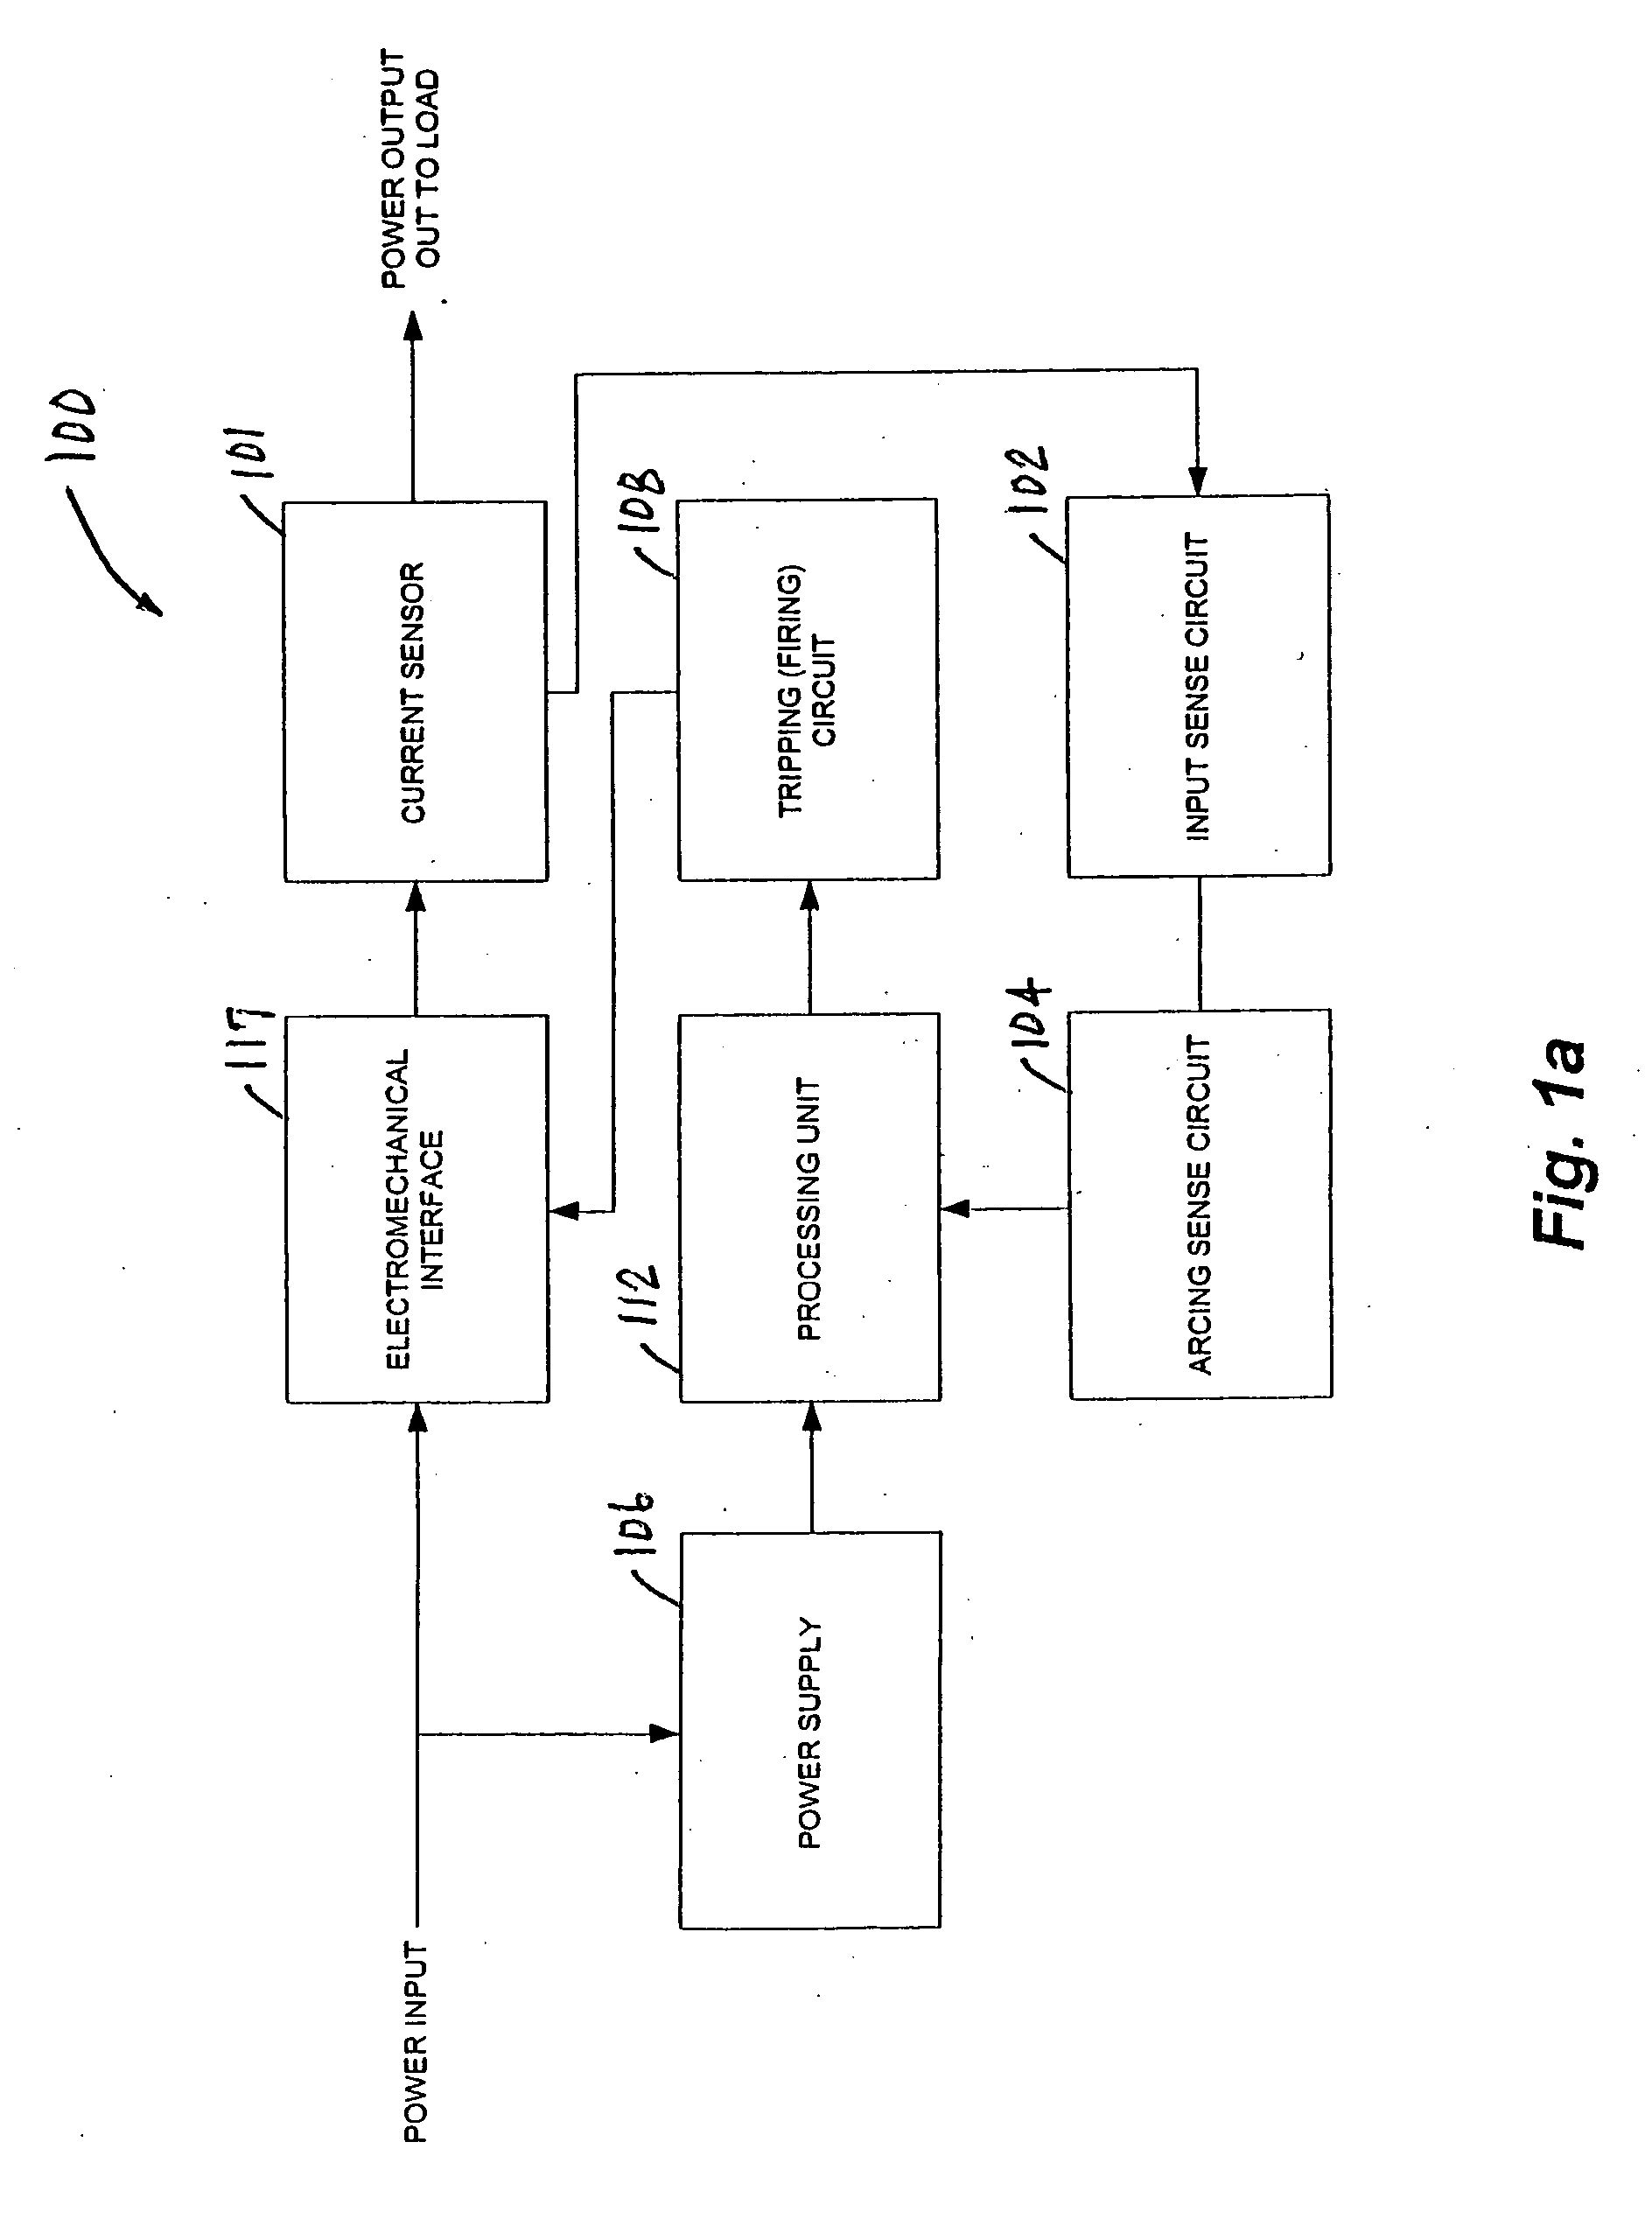 Method for detecting arc faults